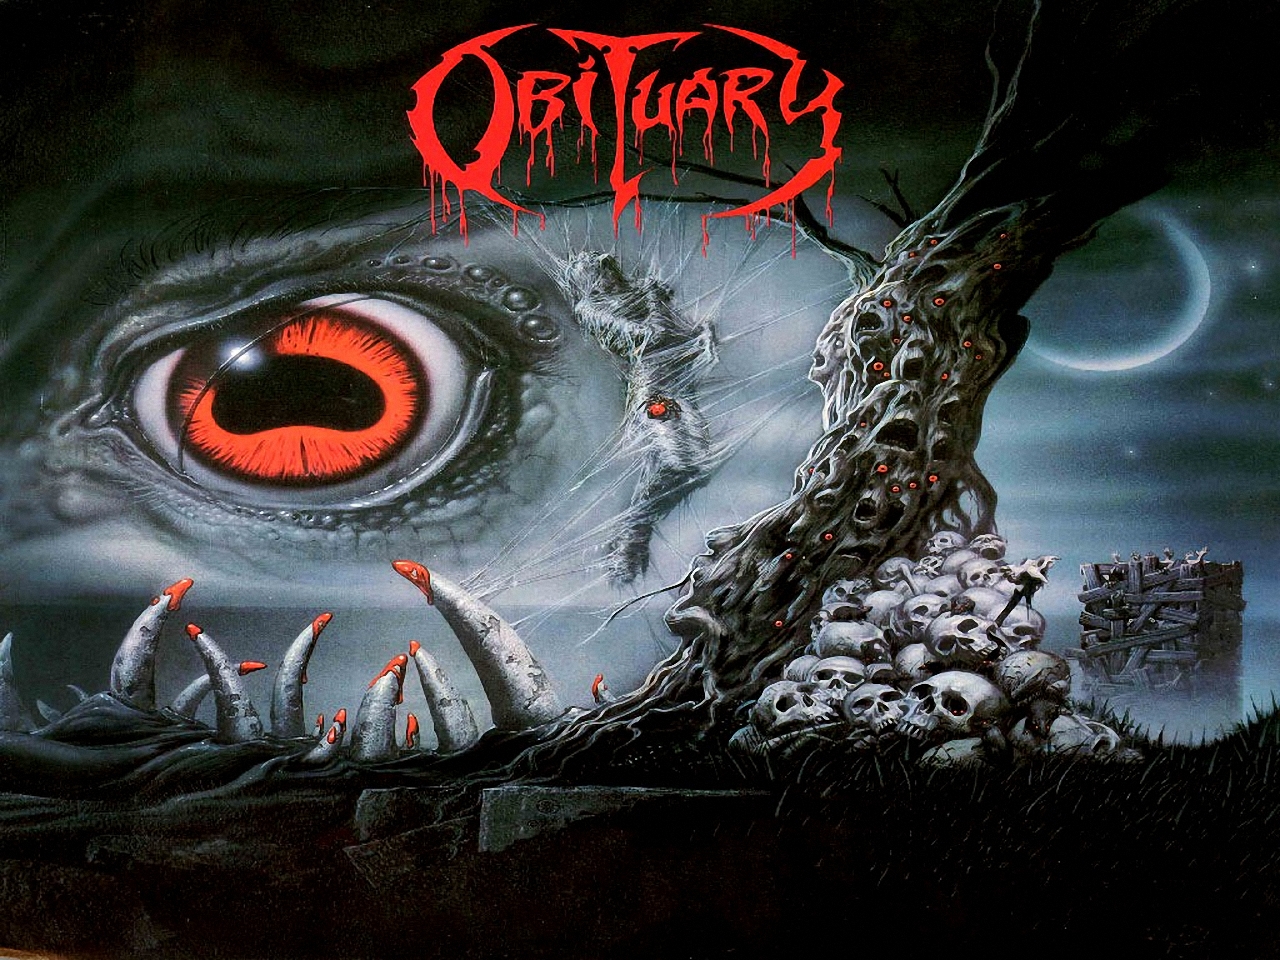 Obituary   Cause of death wallpaper   ForWallpapercom